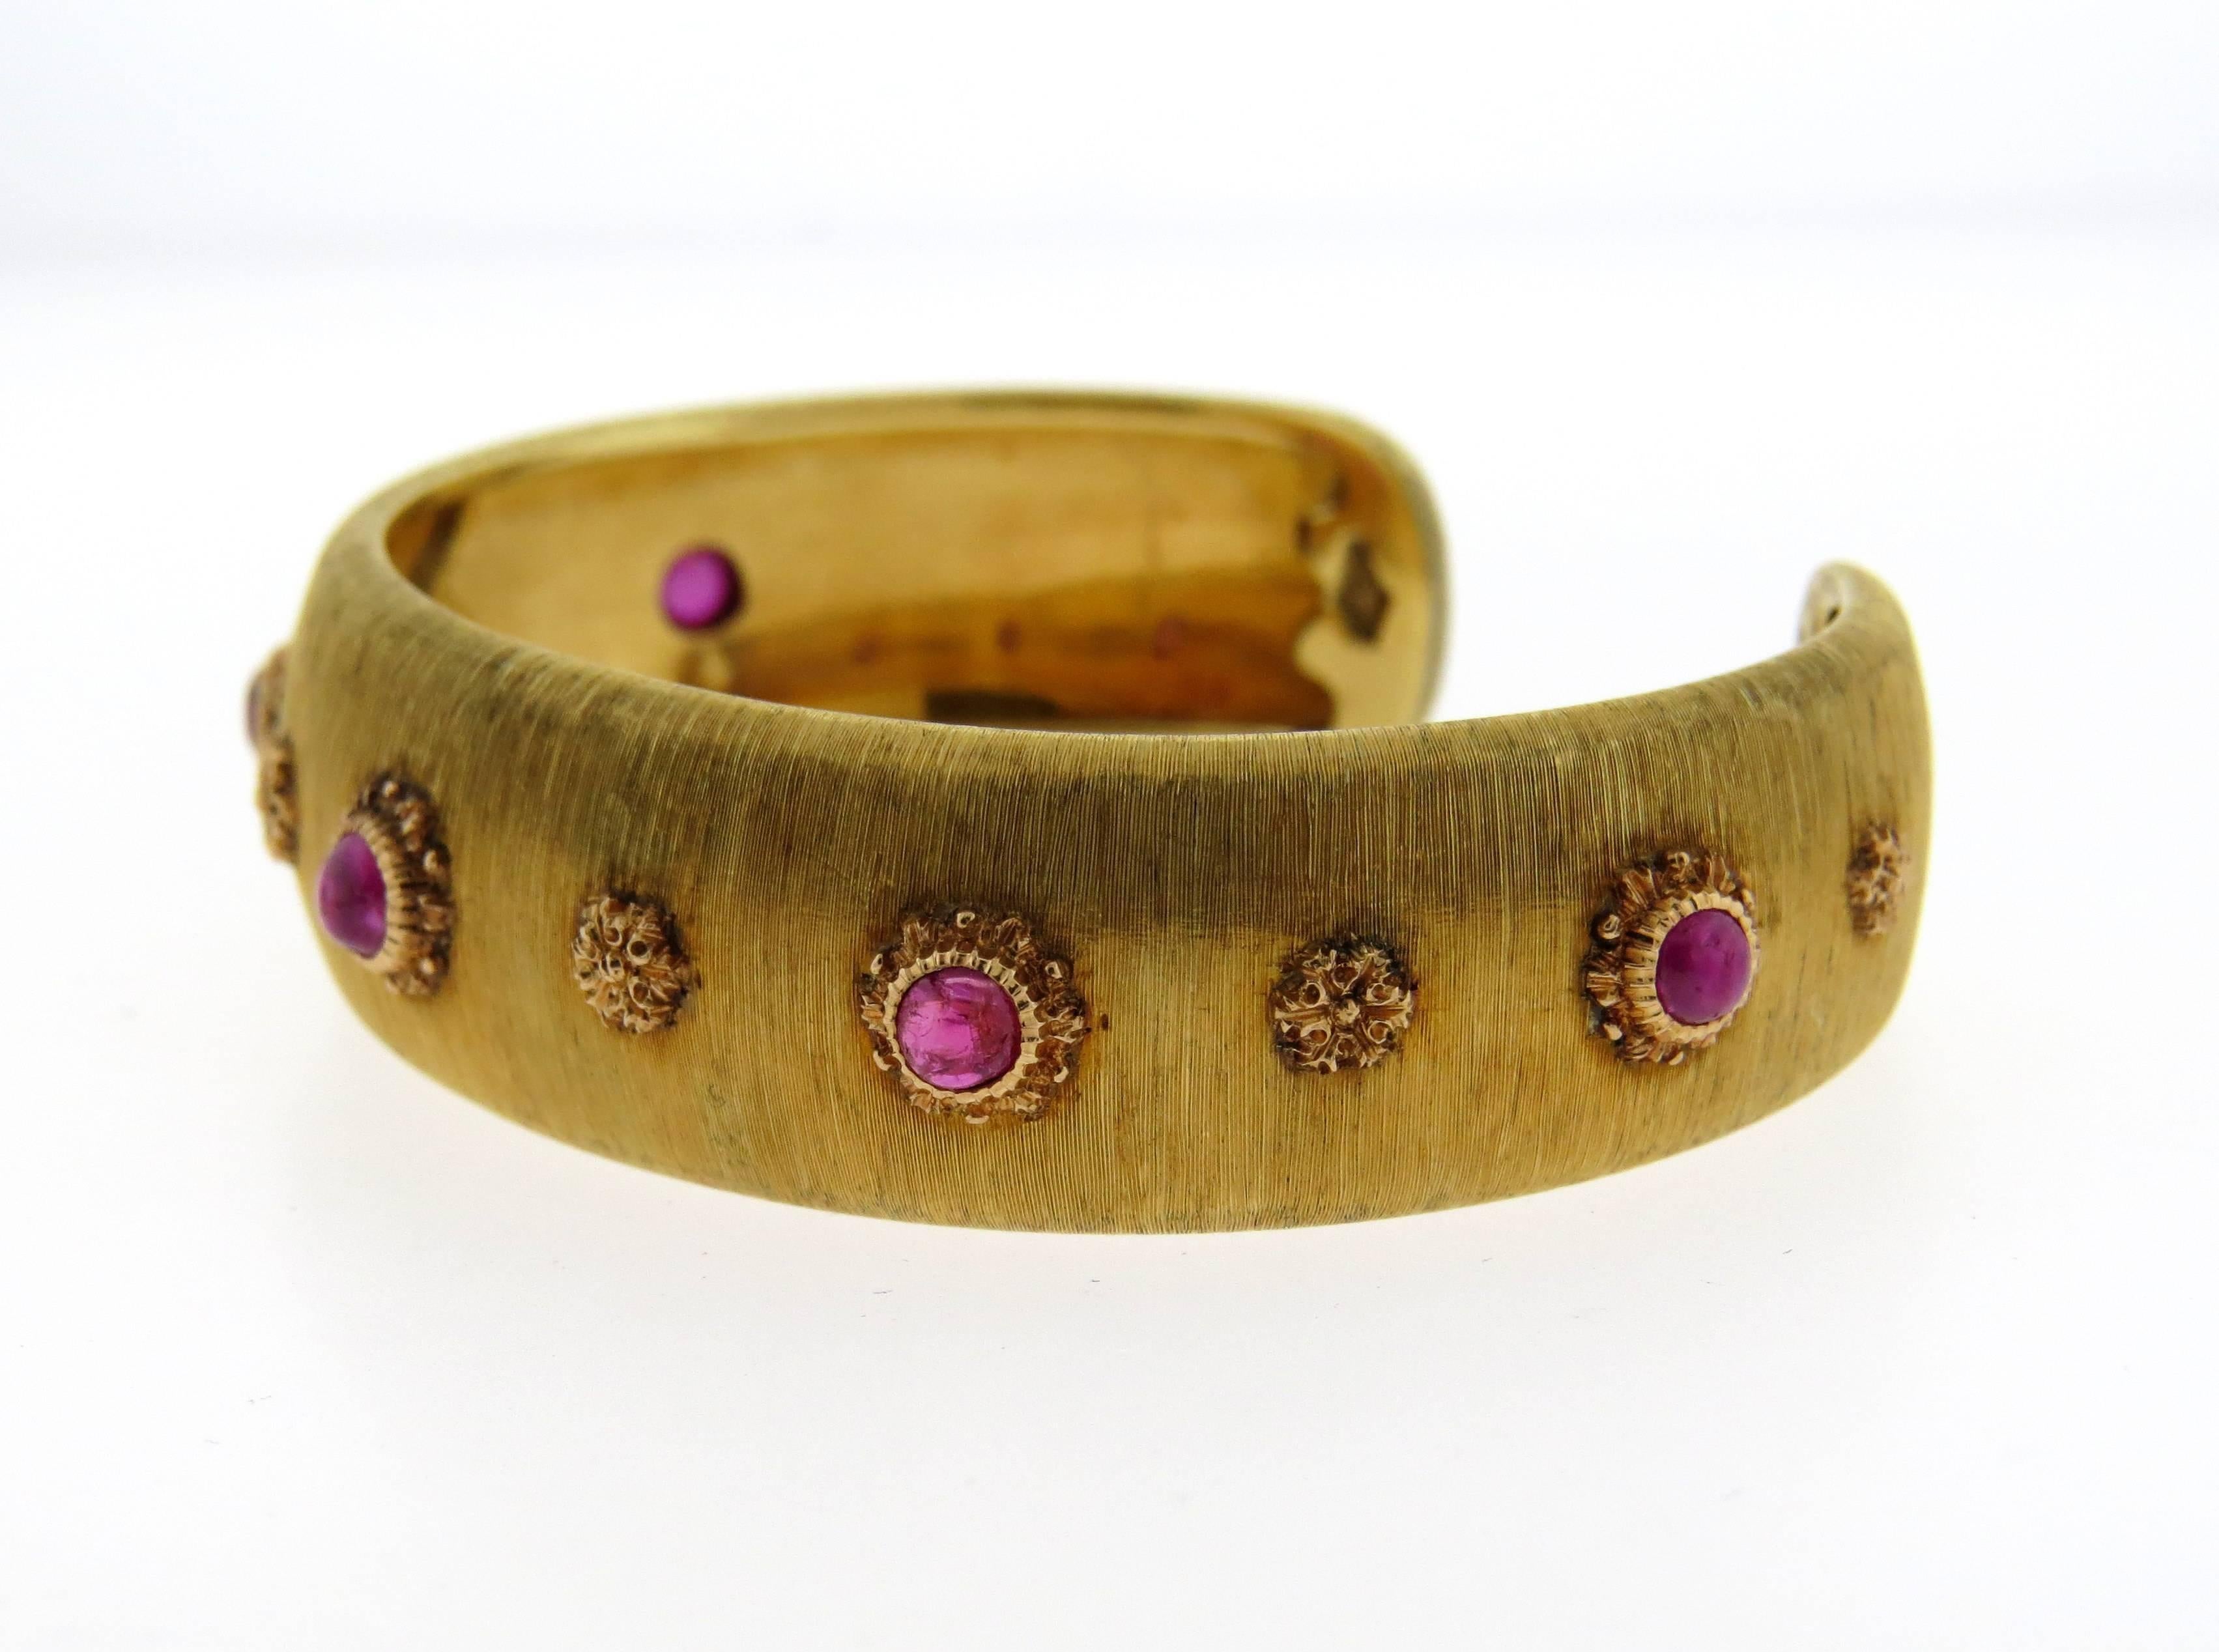 Magnificent 18K gold cuff by Buccellati featuring ruby cabochons. Cuff measures 16.1mm wide and will fit up to a 6.5